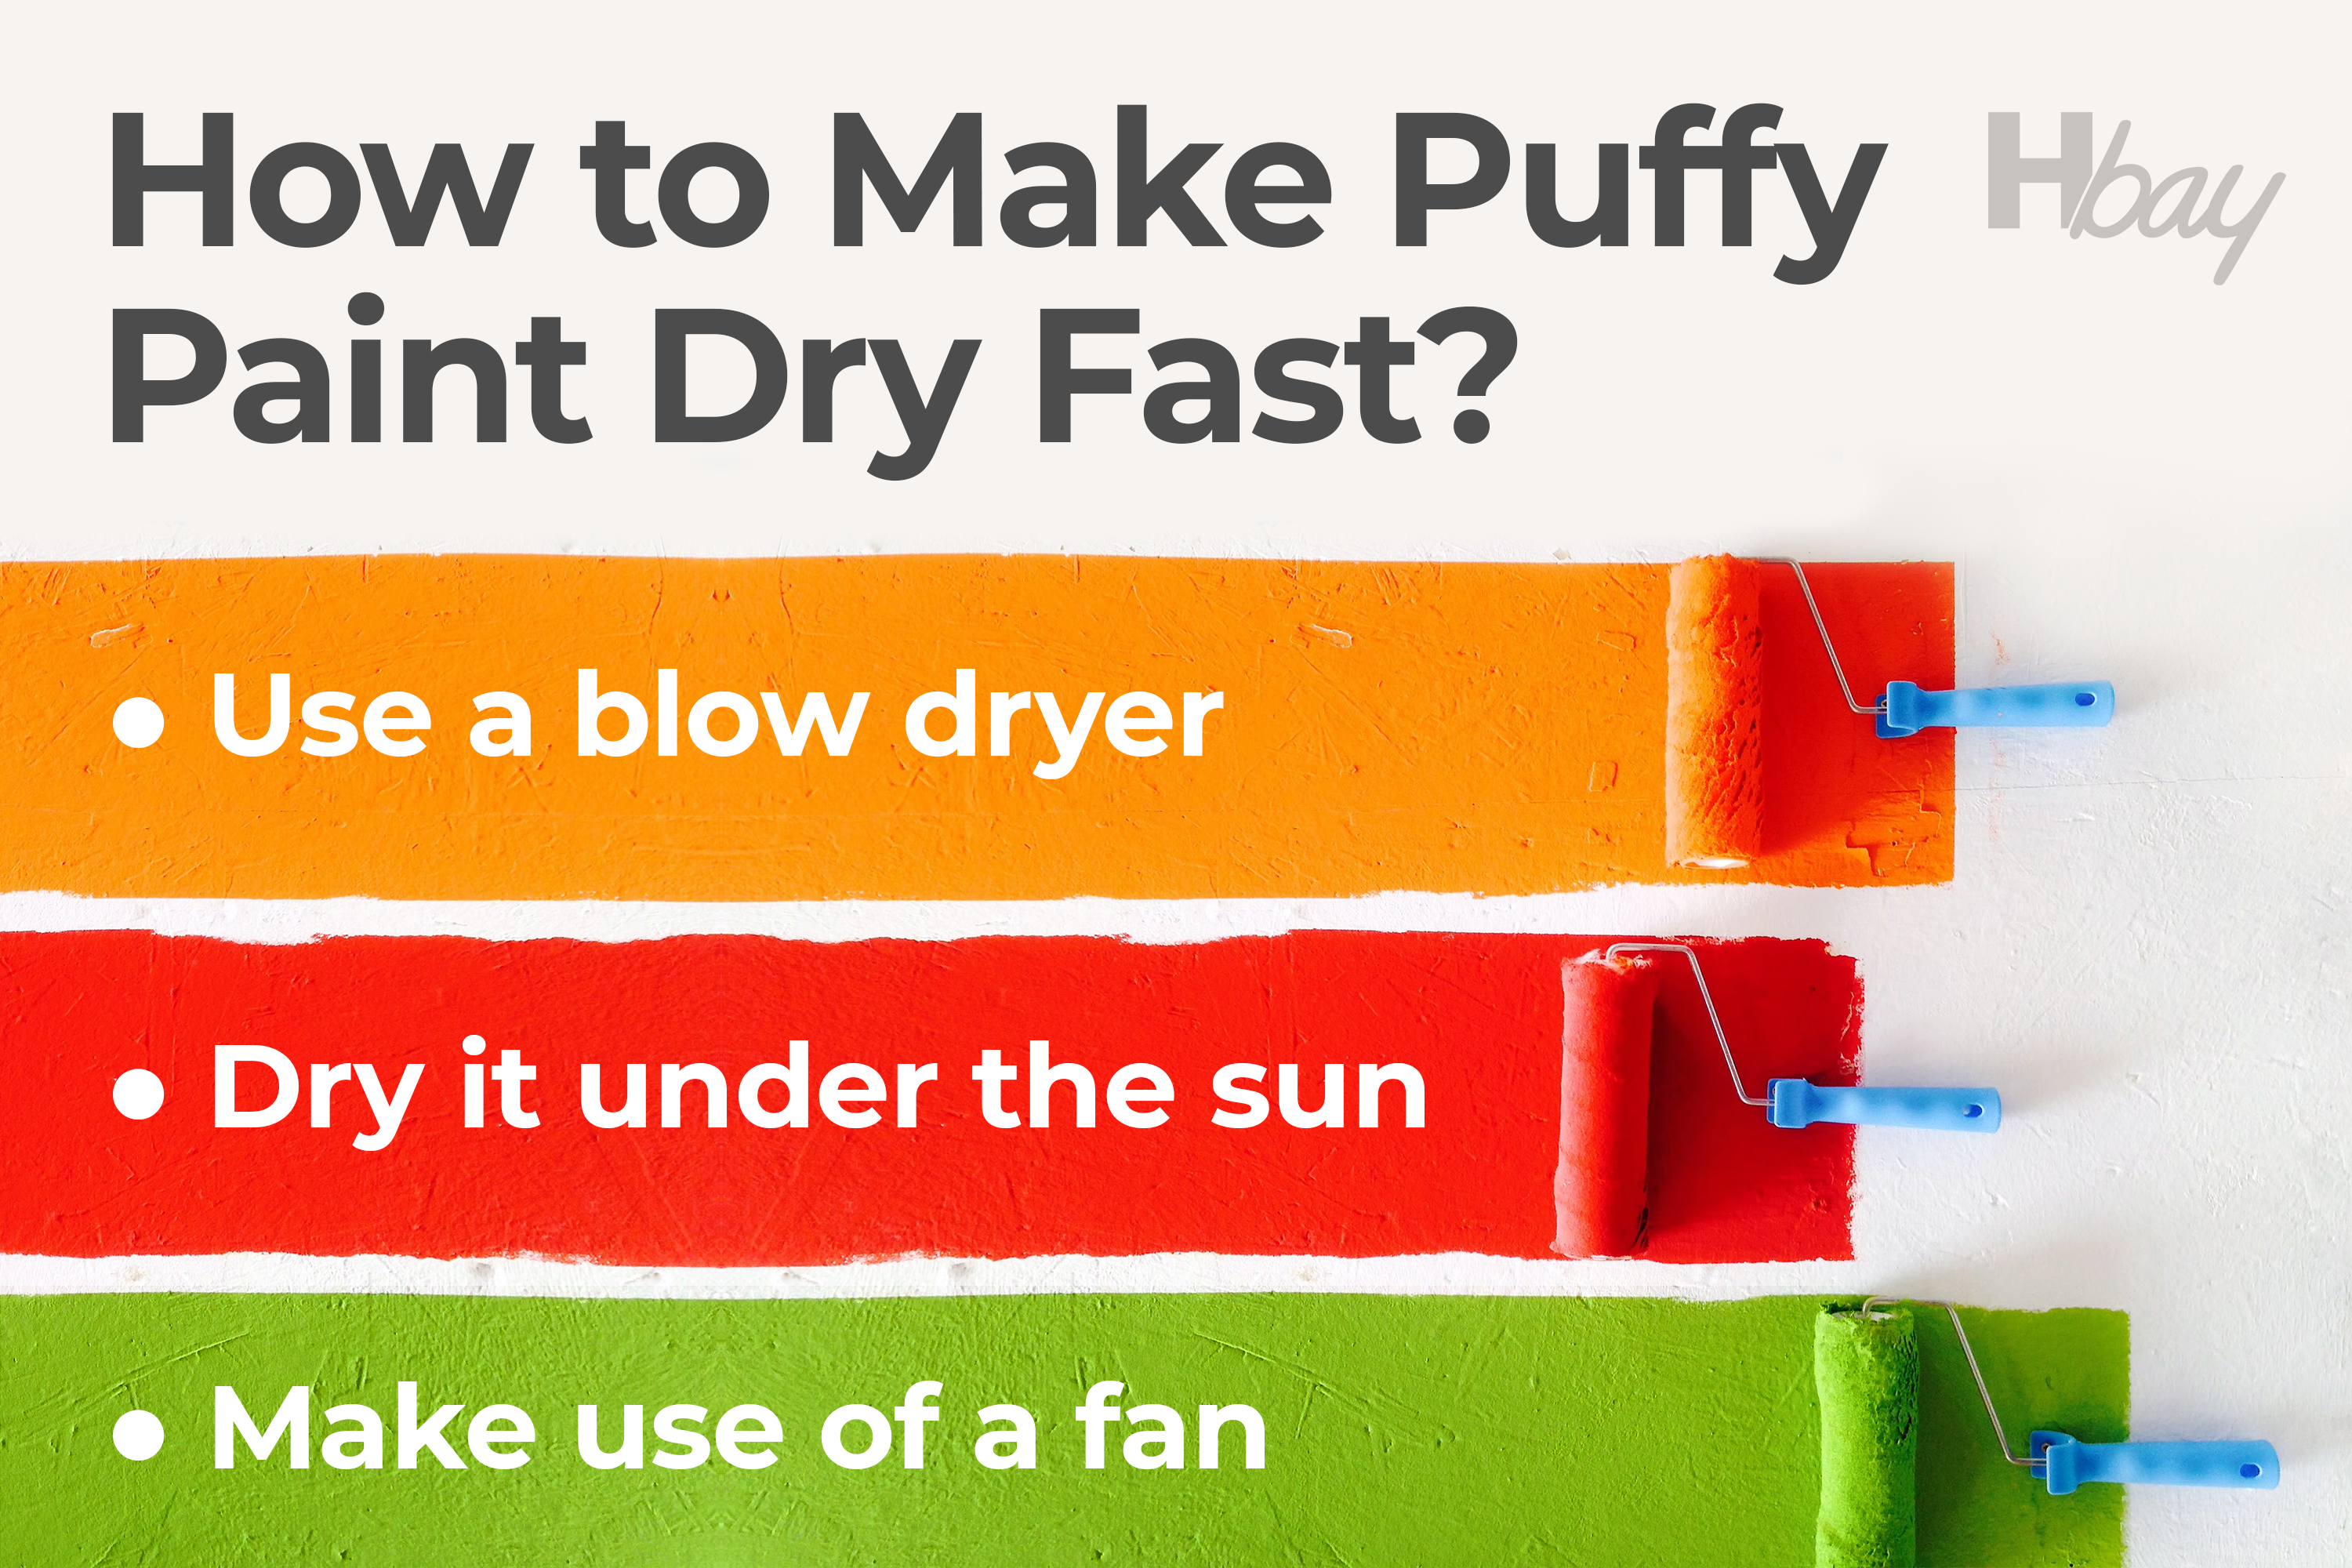 How to Make Puffy Paint Dry Fast